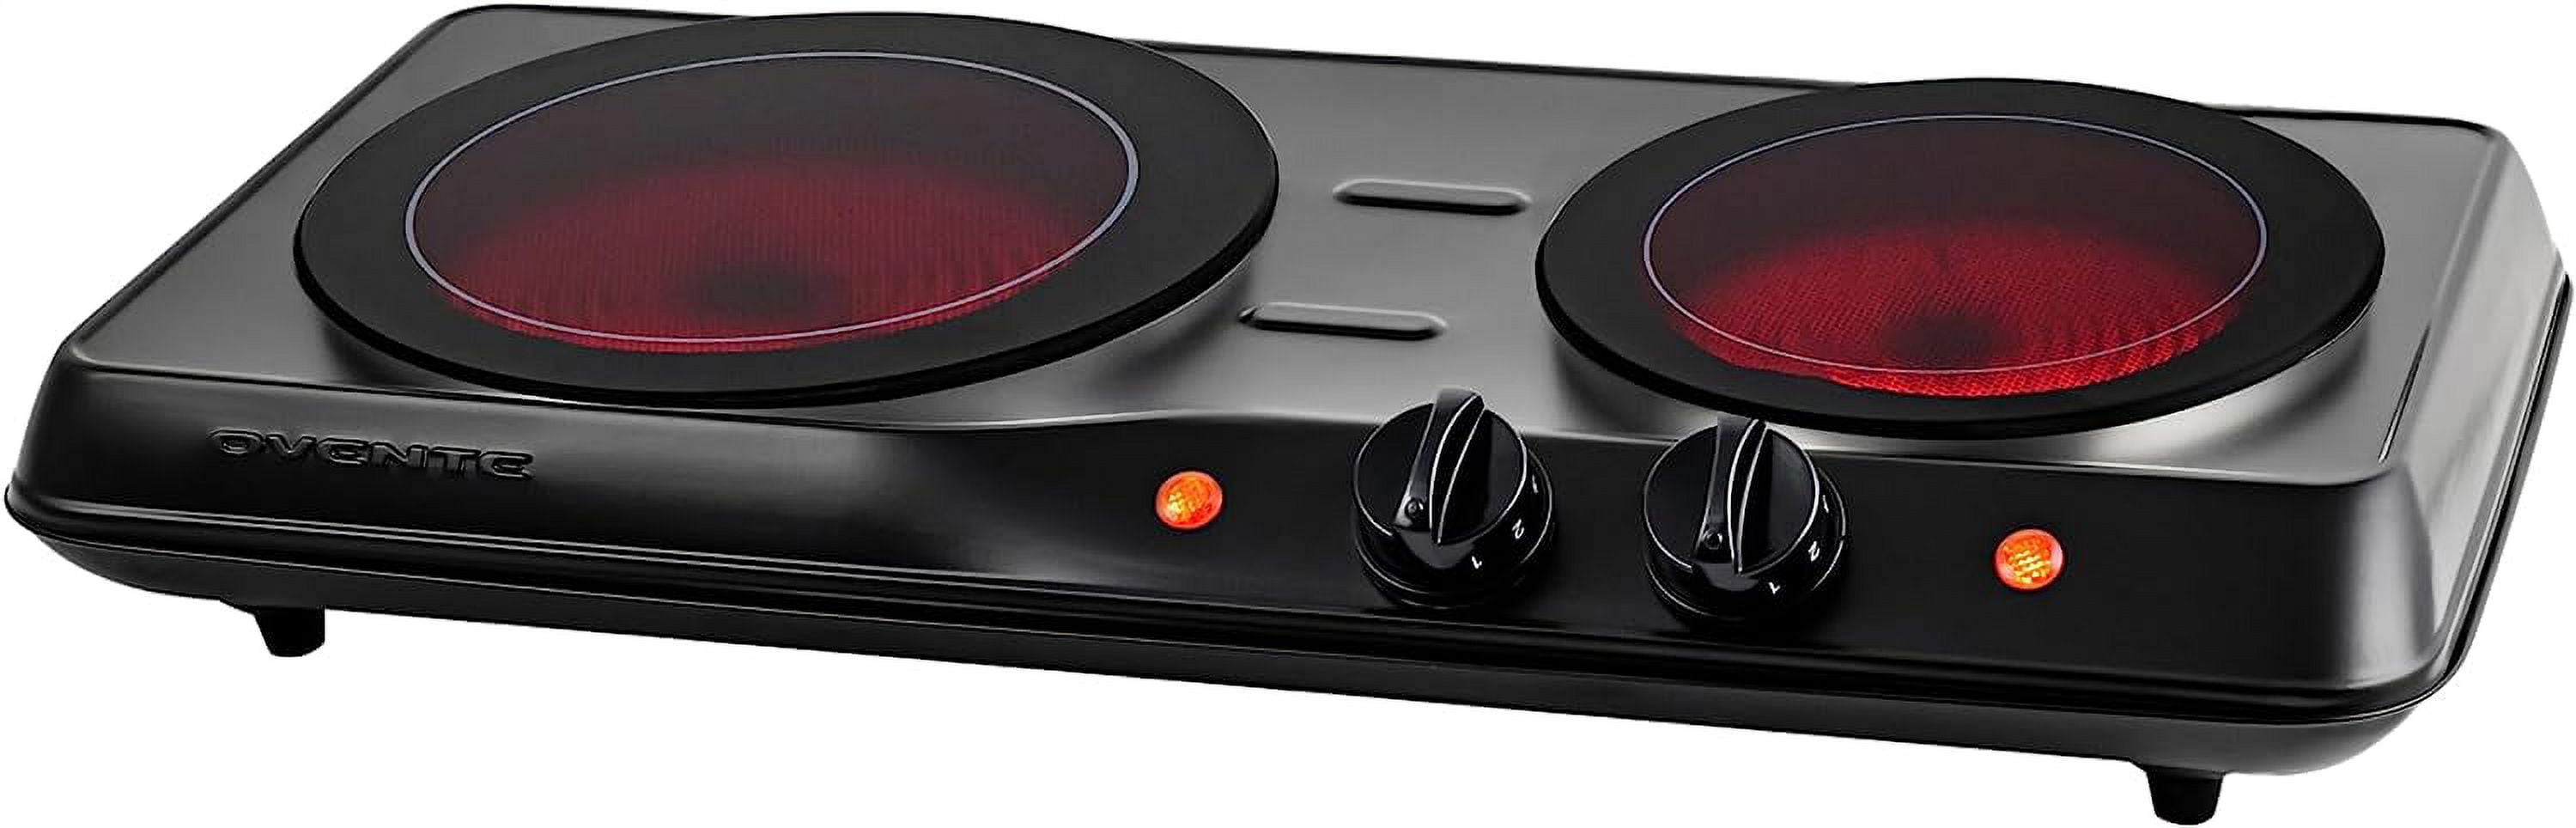 Double Burner Electric Cooktop, iNova Electric Stove Easily Countertop Hot  Plate with 5 Gear Temperature Control, White